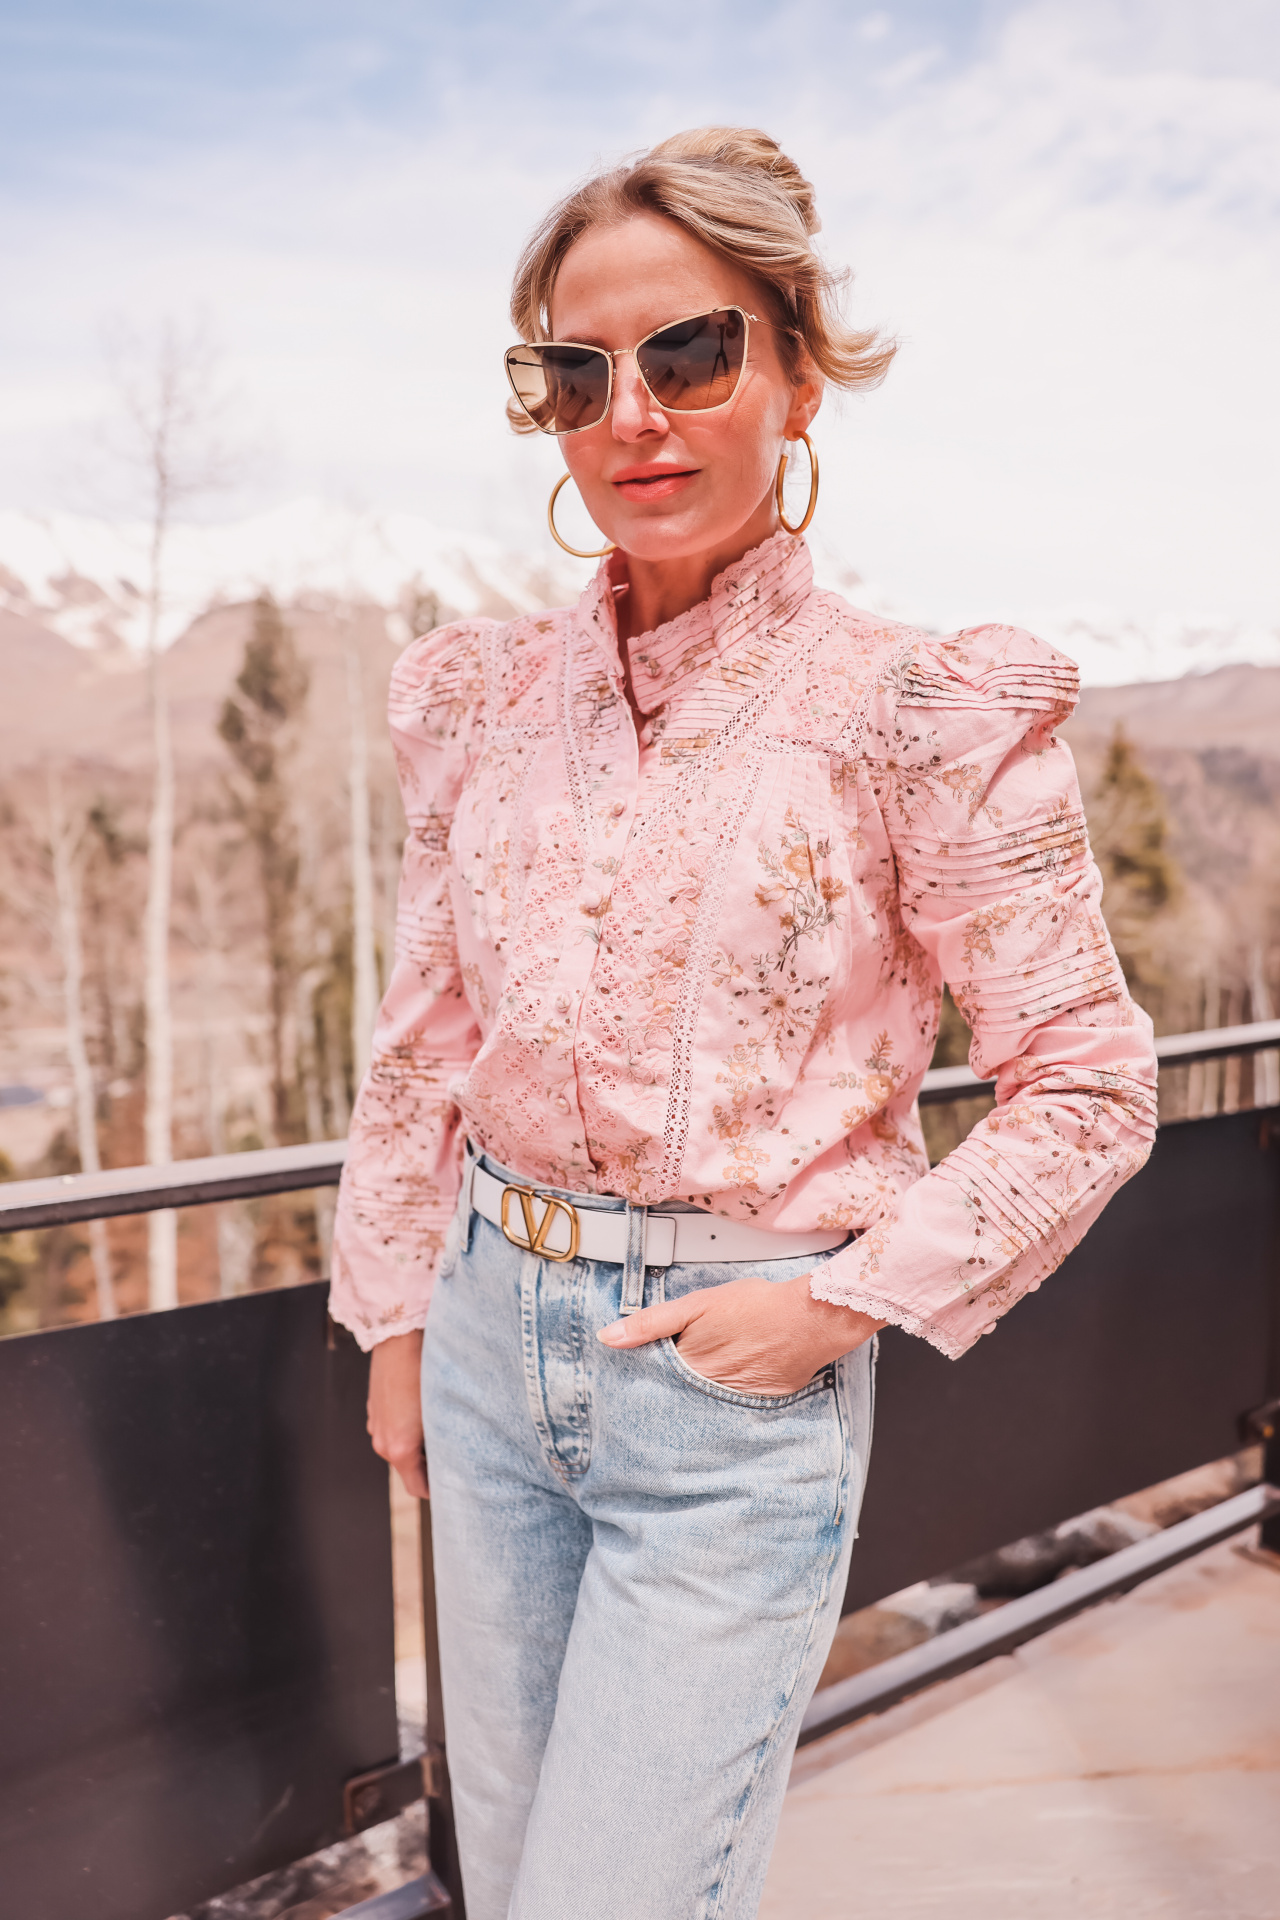 summer tops, best summer tops, casual summer tops, trendy summer tops, floral summer tops, loveshackfancy pink floral blouse, erin busbee, busbee style, fashion over 40, telluride, colorado, maui jim sunglasses, white valentino belt, alice + olivia baggy jeans, vince camuto booties